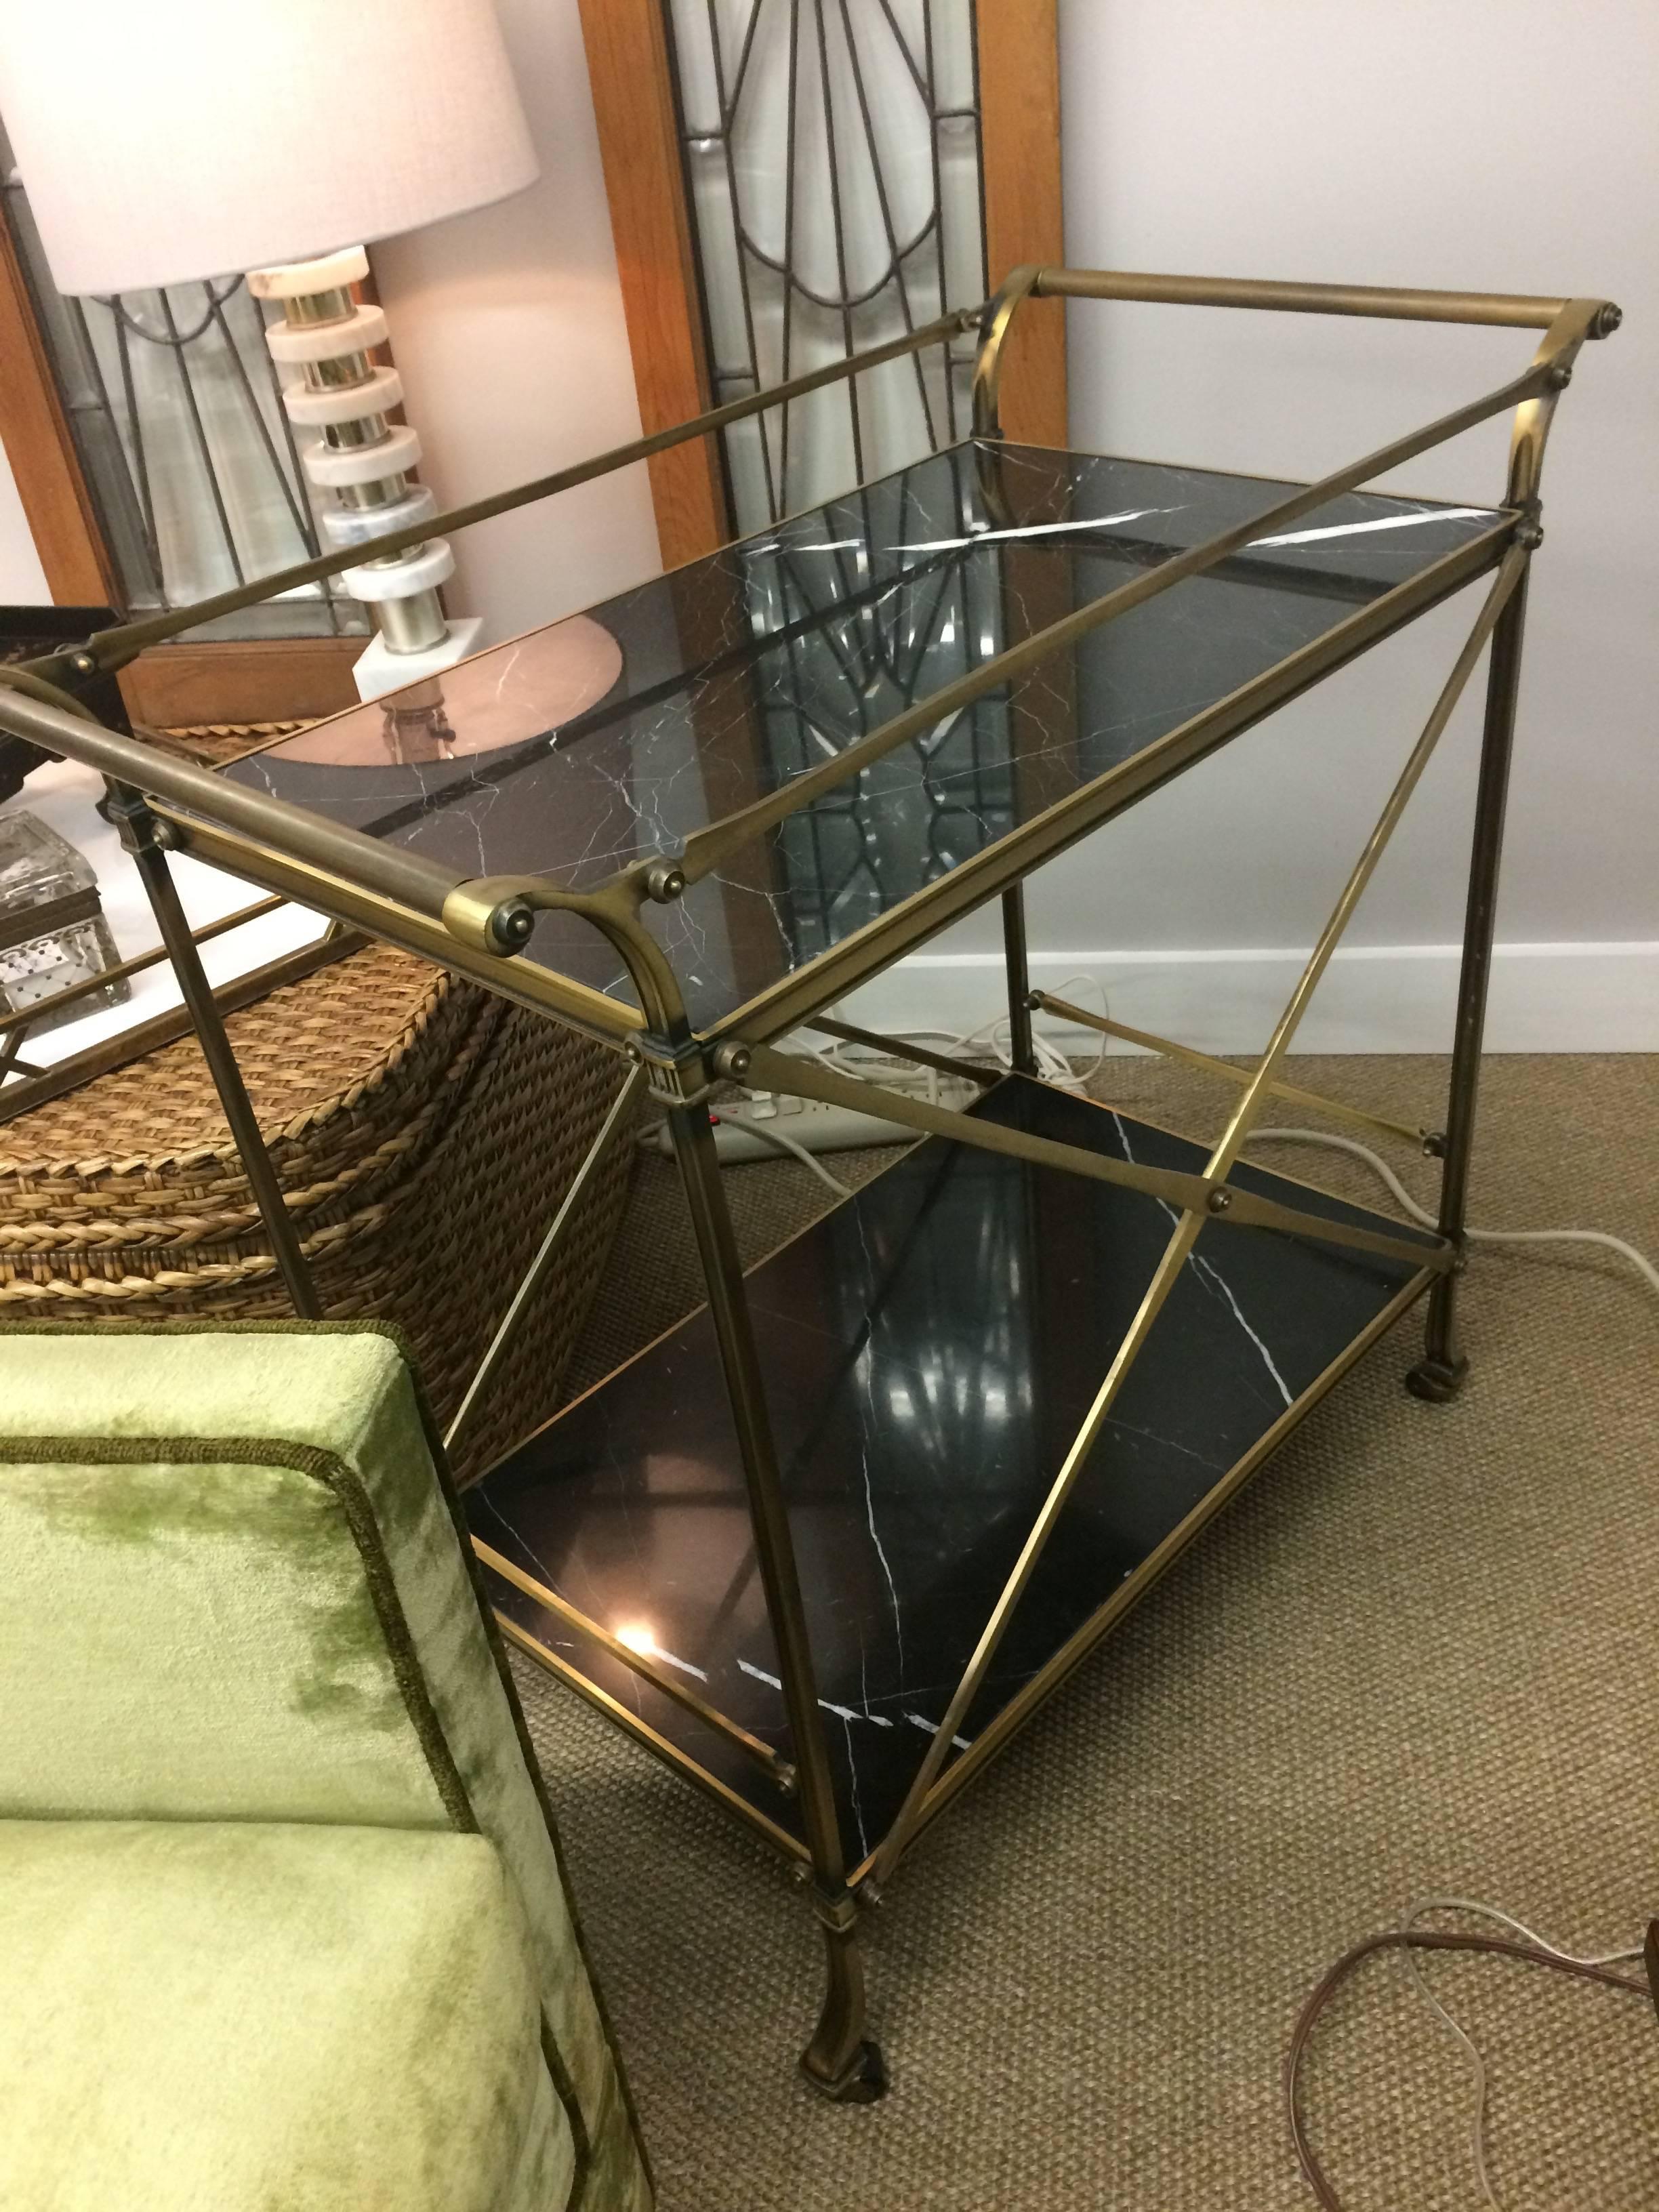 Very handsome well constructed heavy bar cart with neoclassical design having a brushed metal structure and two black with white veined marble inserts. On casters.